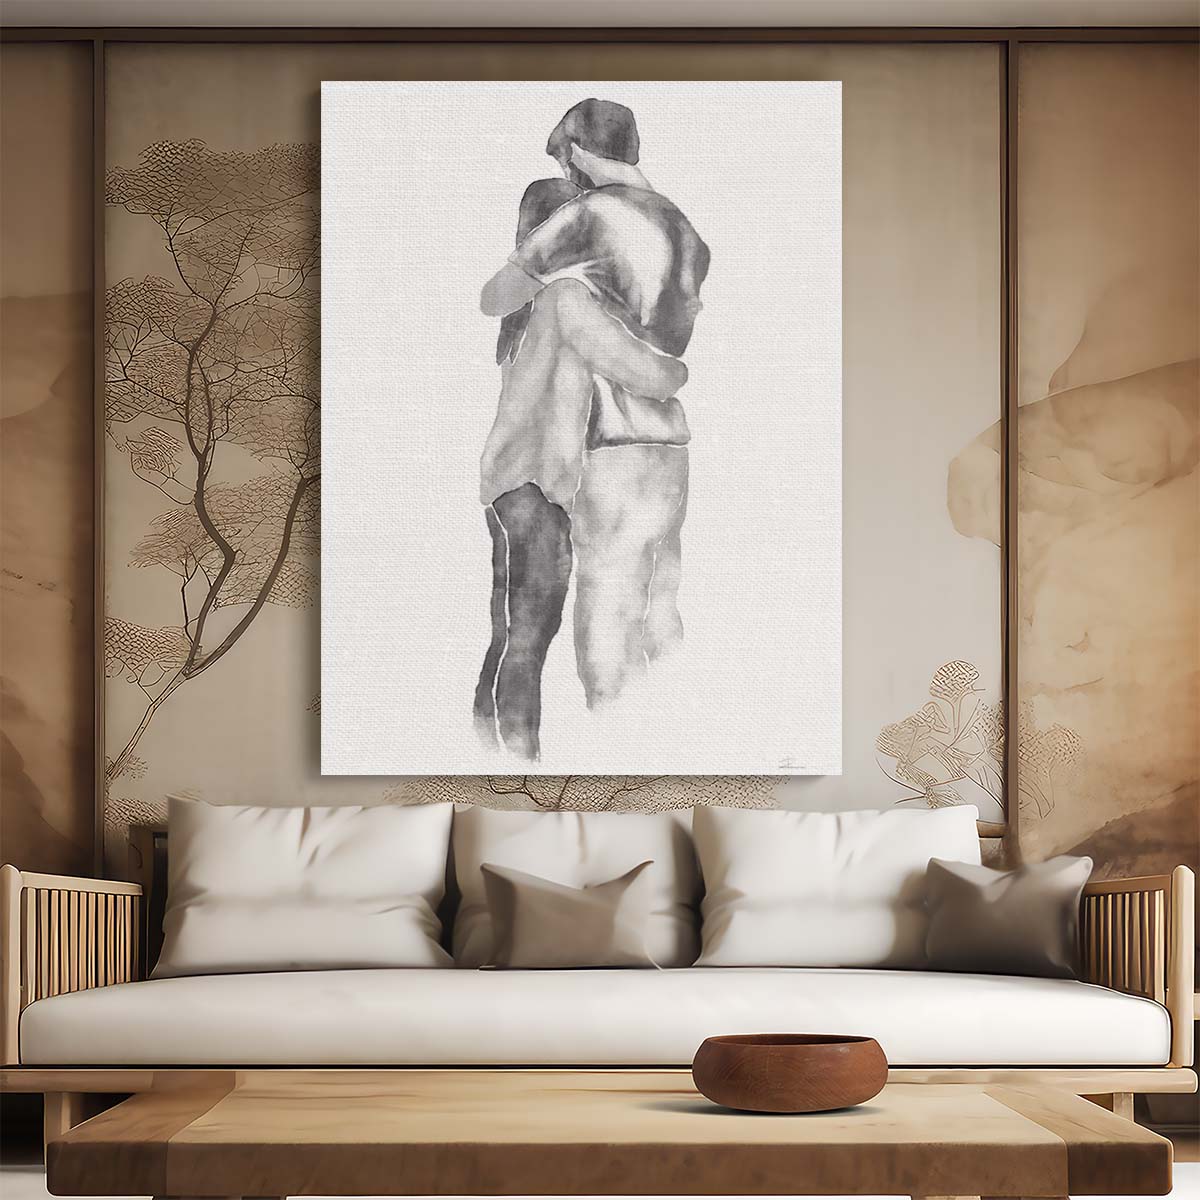 Romantic Embrace Watercolor Illustration - Monochrome Valentine's Duo Art by Luxuriance Designs, made in USA